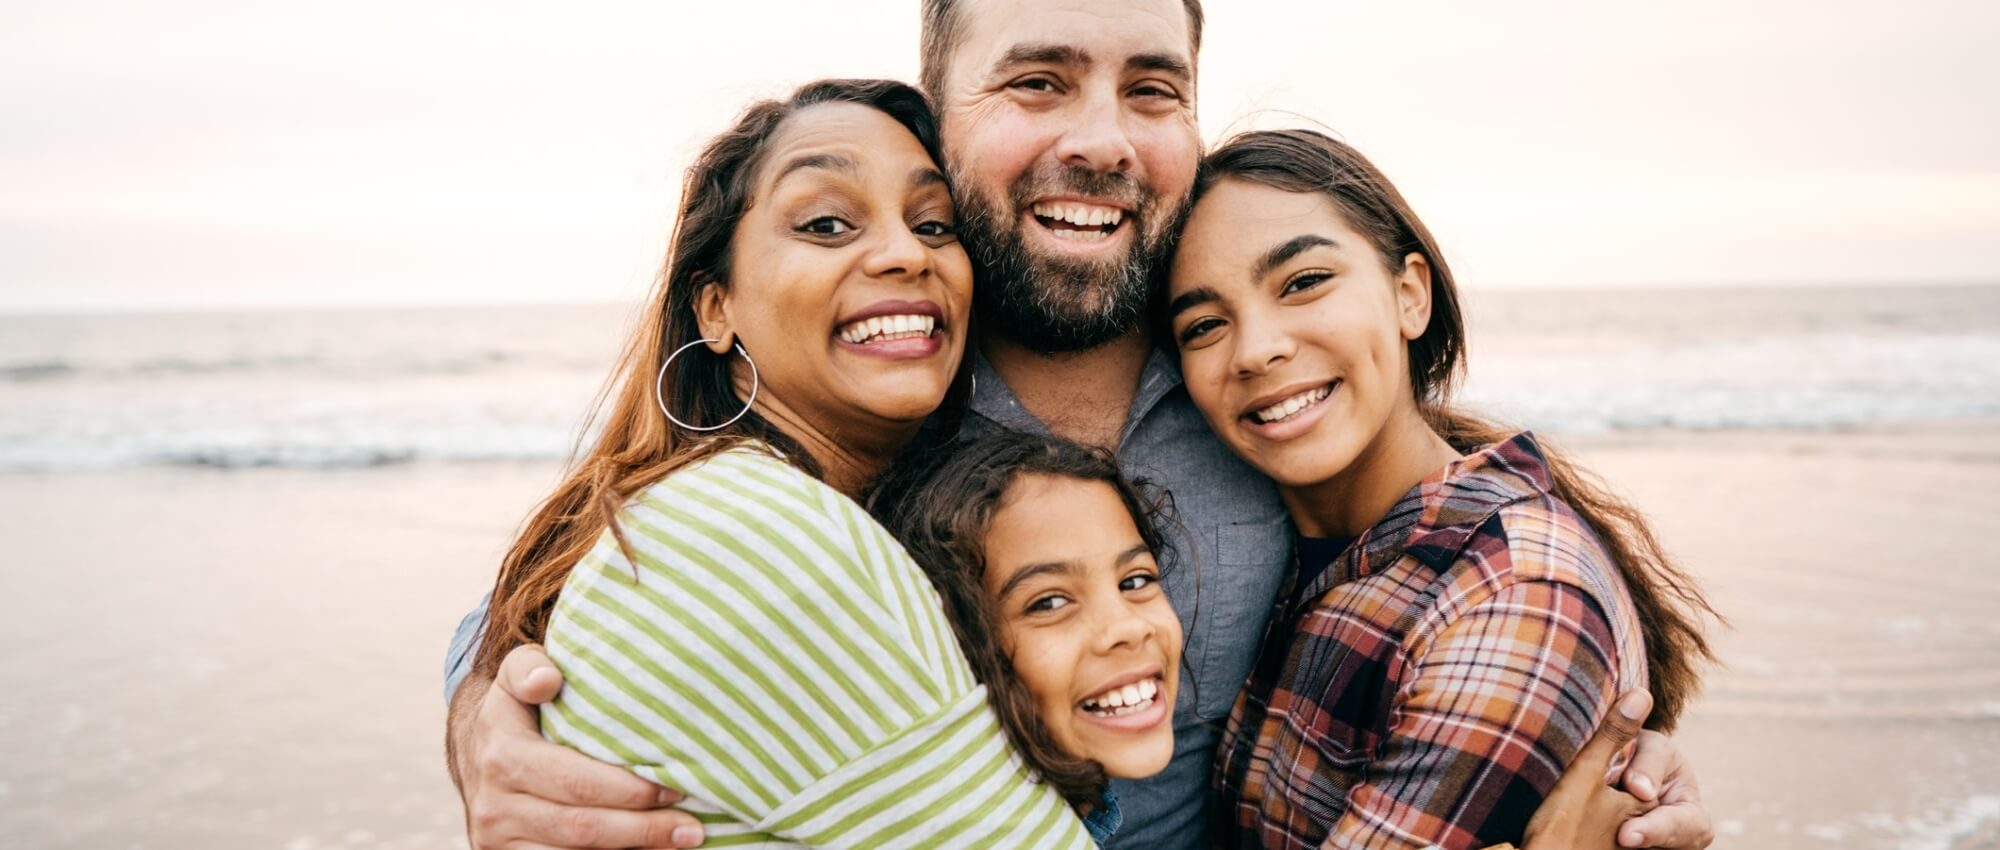 Learn How Life Insurance Can Help Protect Your Family